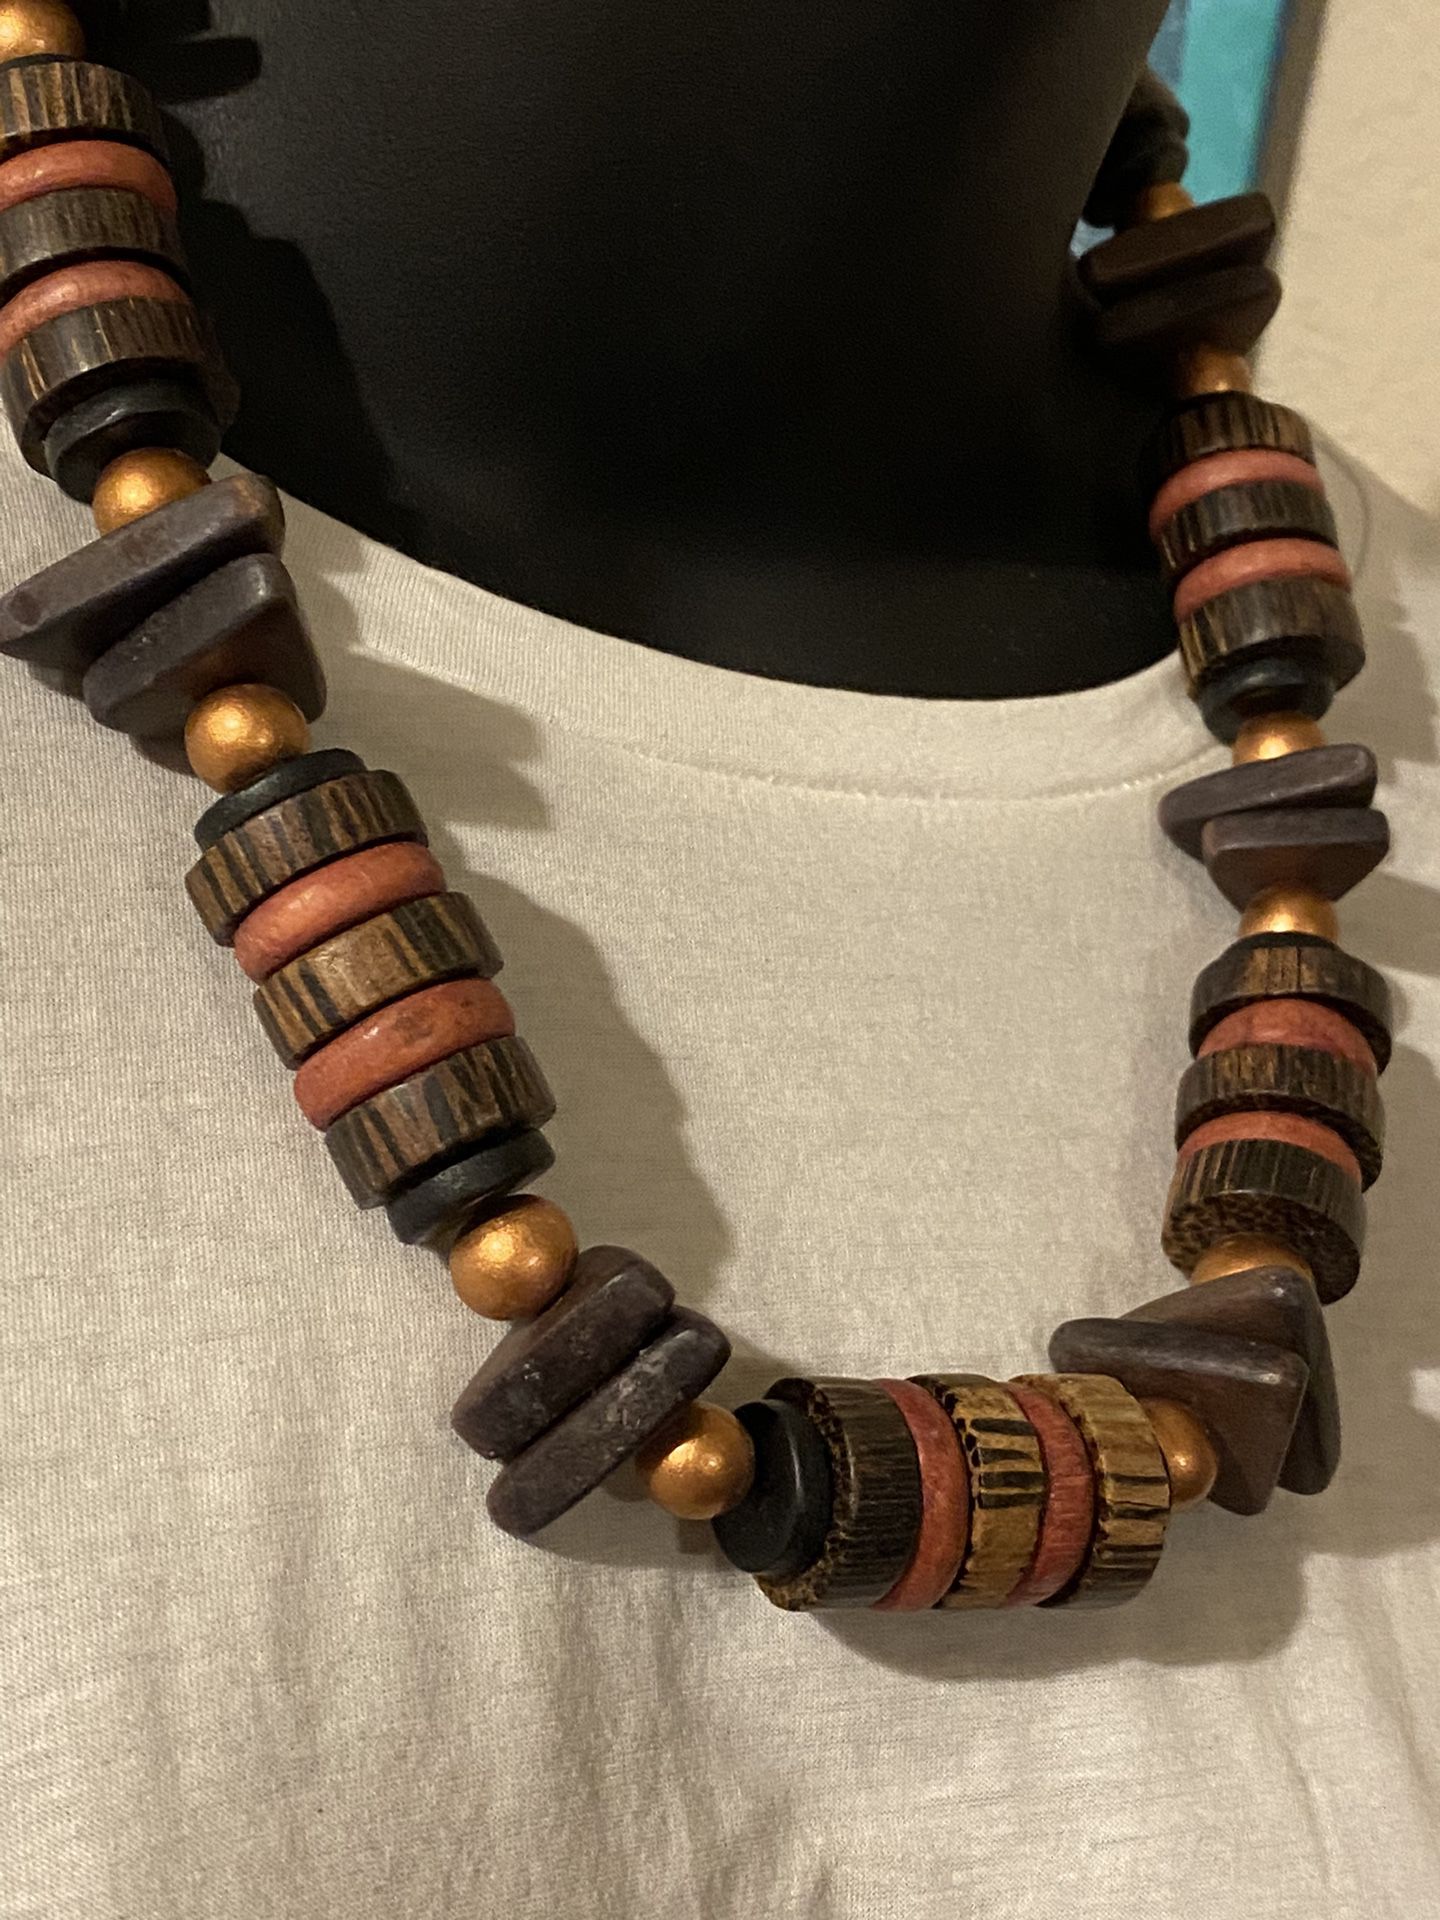 Wooden Bead Necklace Approximately 23”